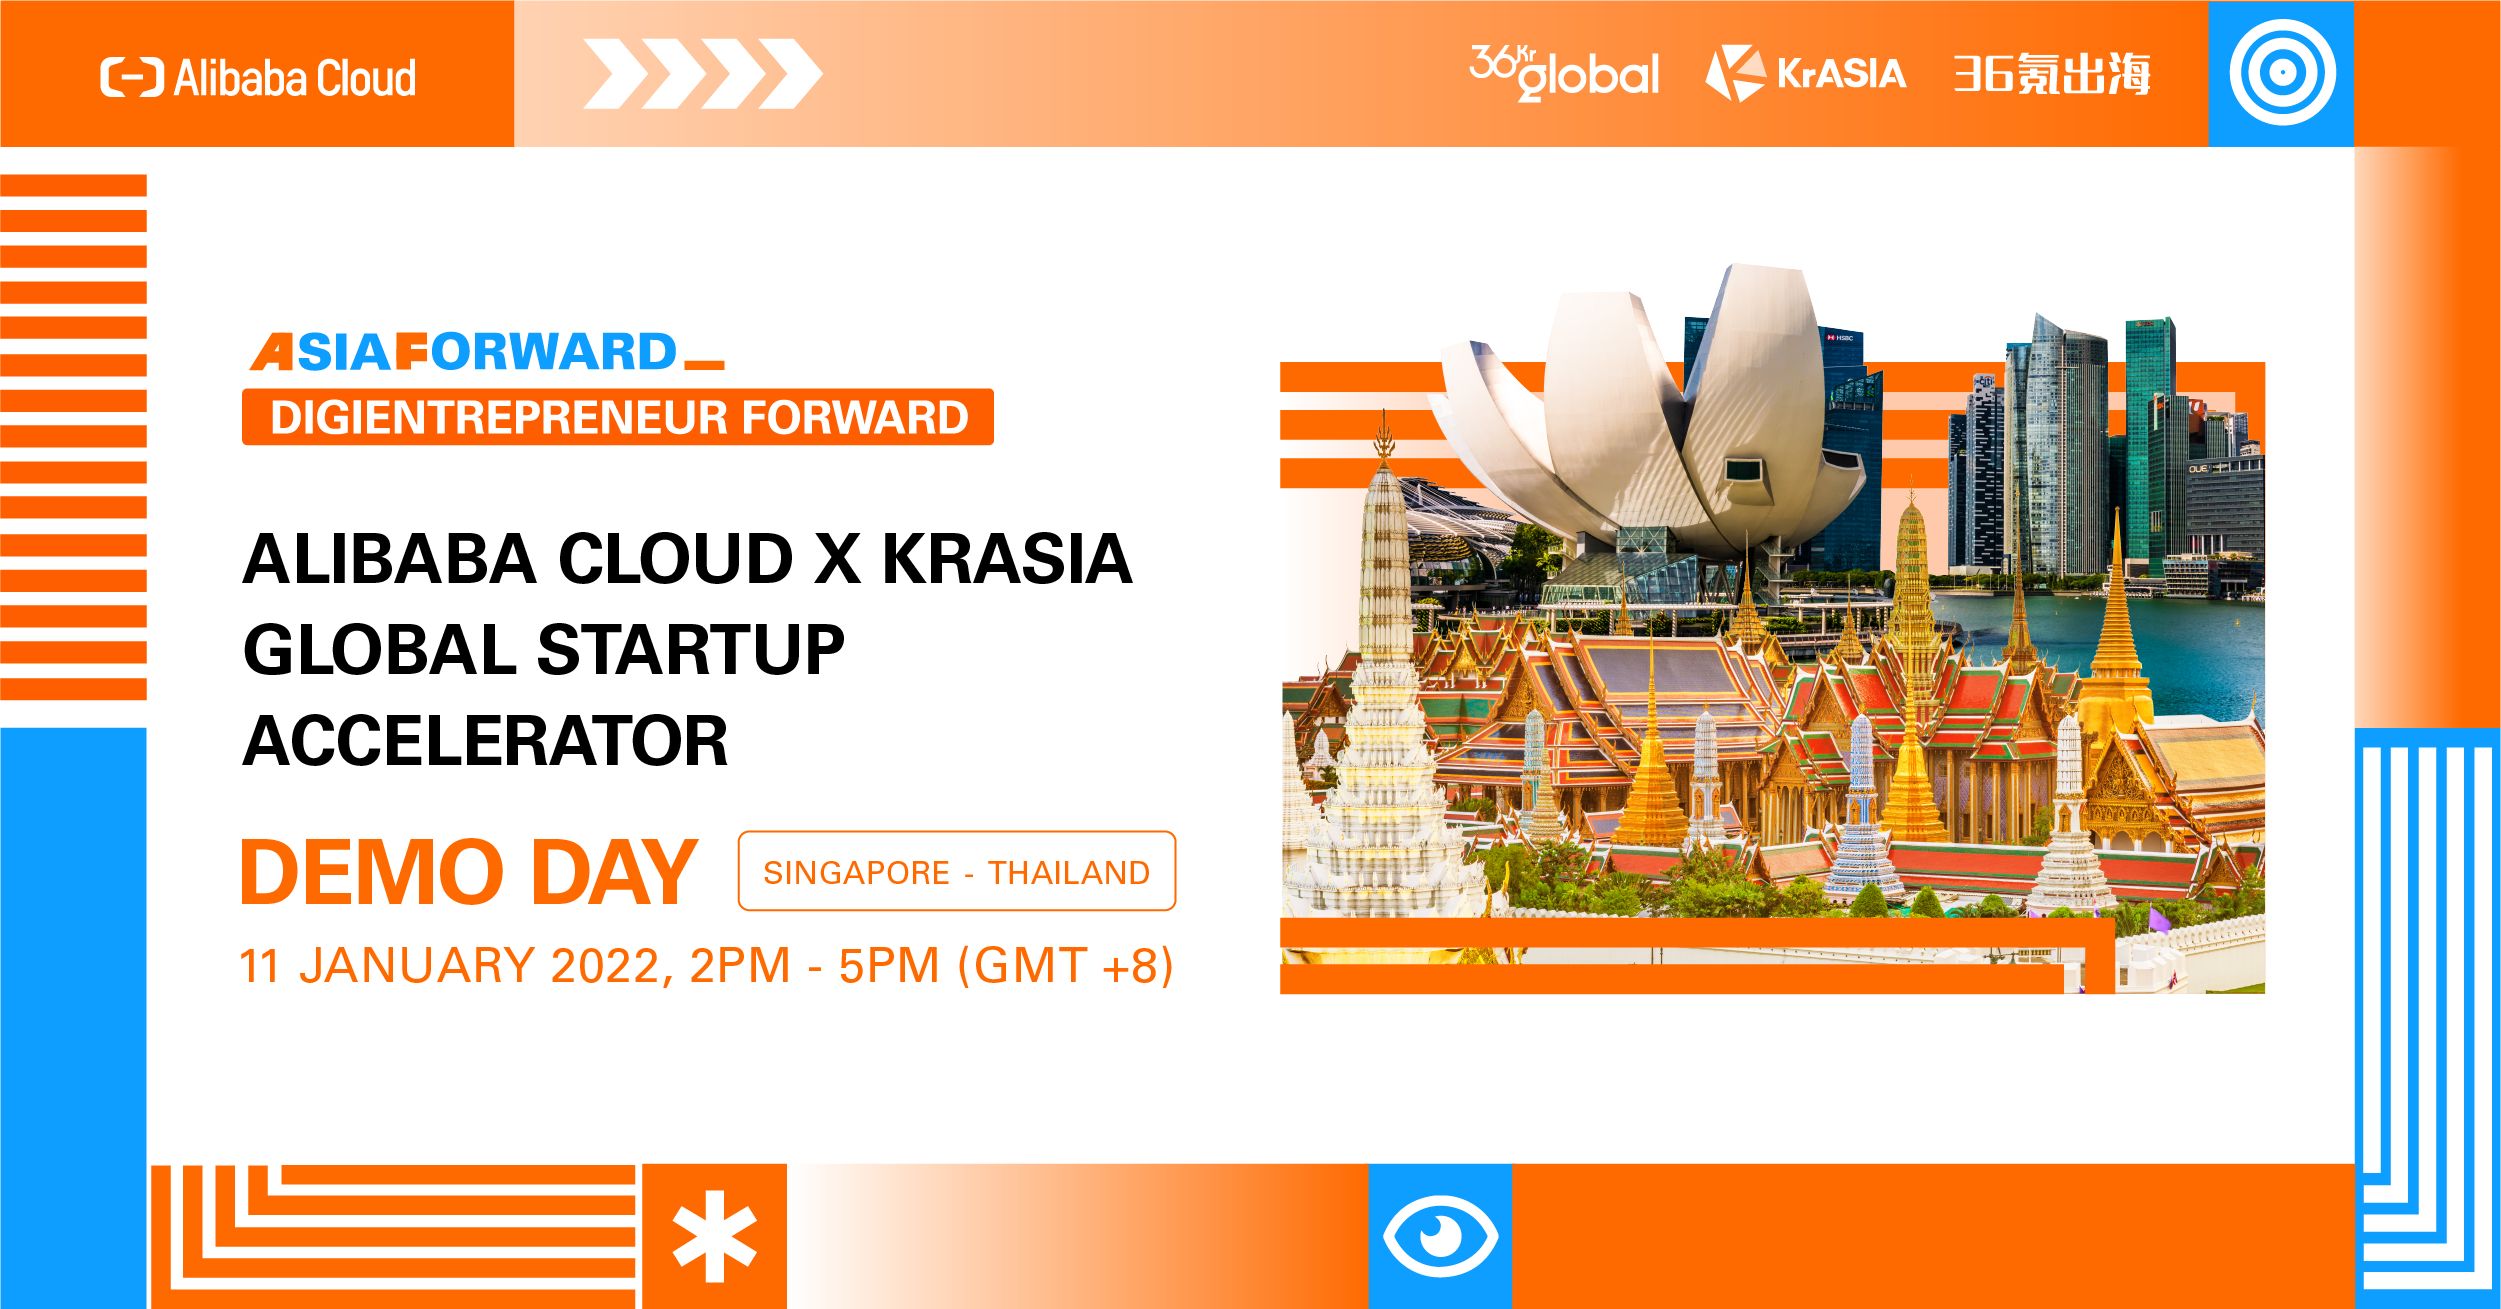 Alibaba Cloud x KrASIA Global Startup Accelerator announces finalists for joint Singapore-Thailand Demo Day